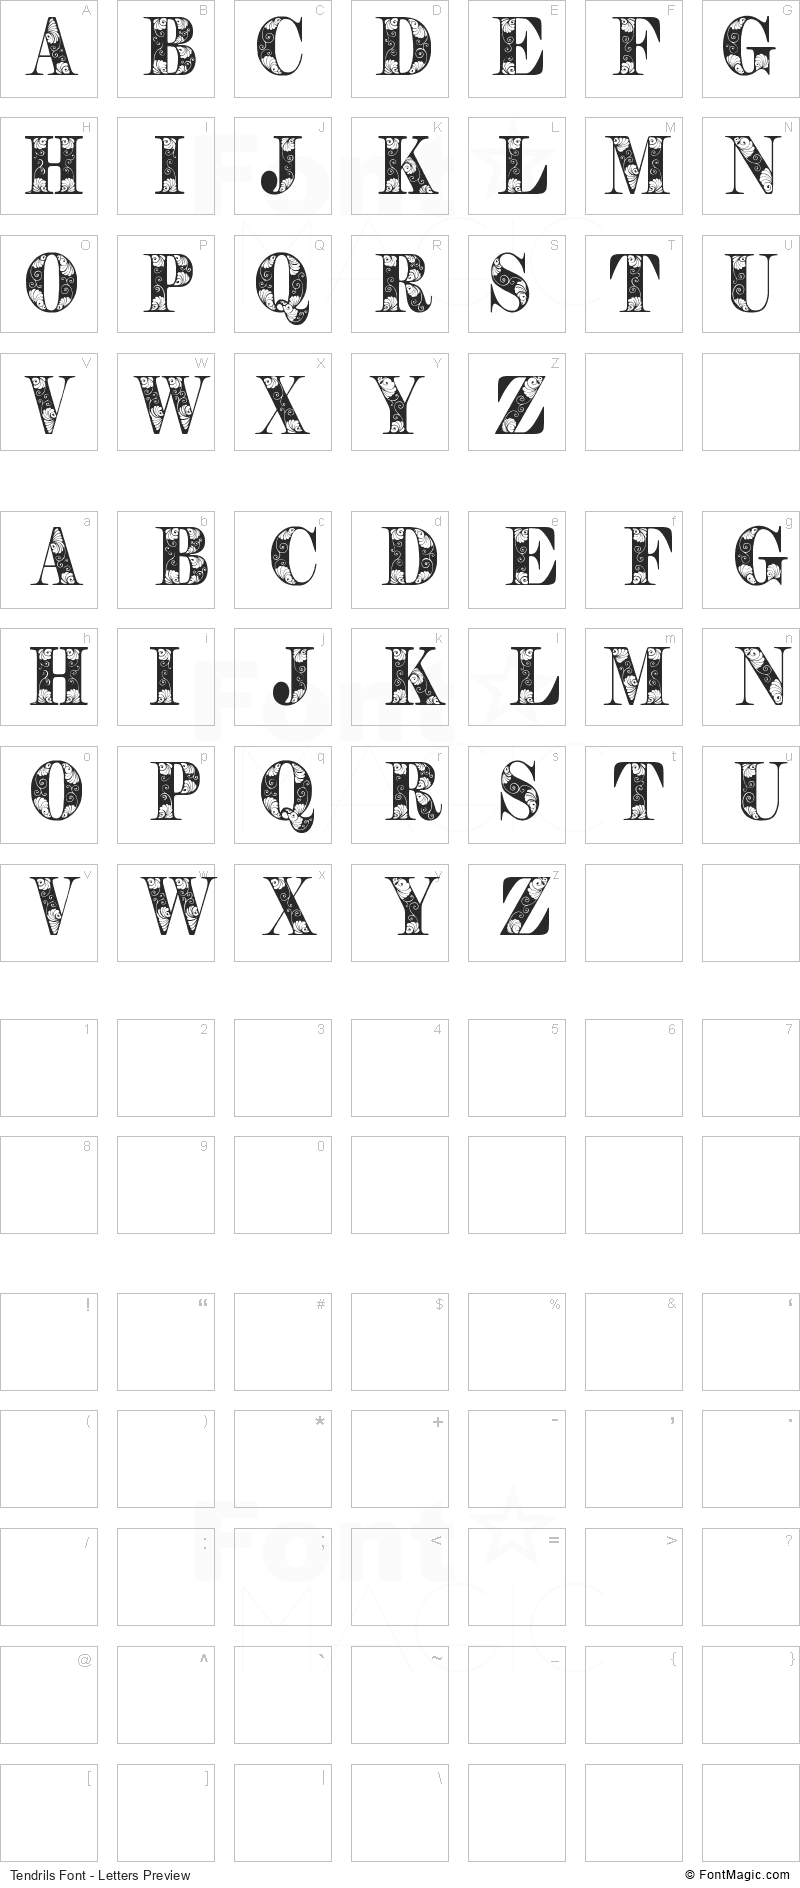 Tendrils Font - All Latters Preview Chart